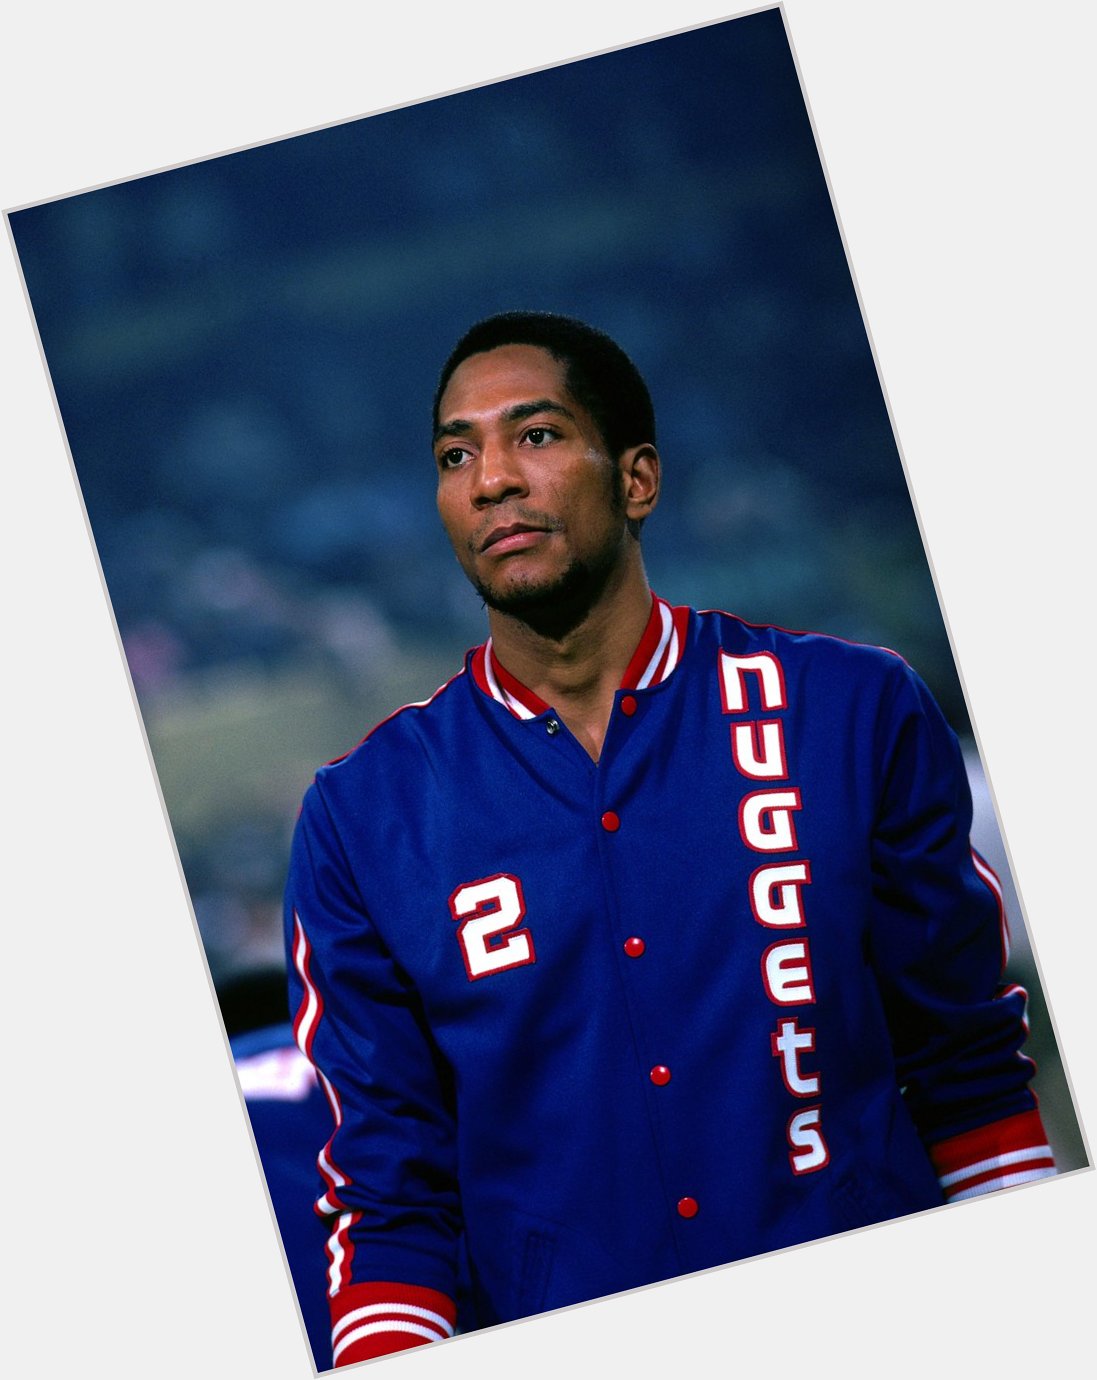 Happy birthday to the all-time leading scorer, Alex English! 